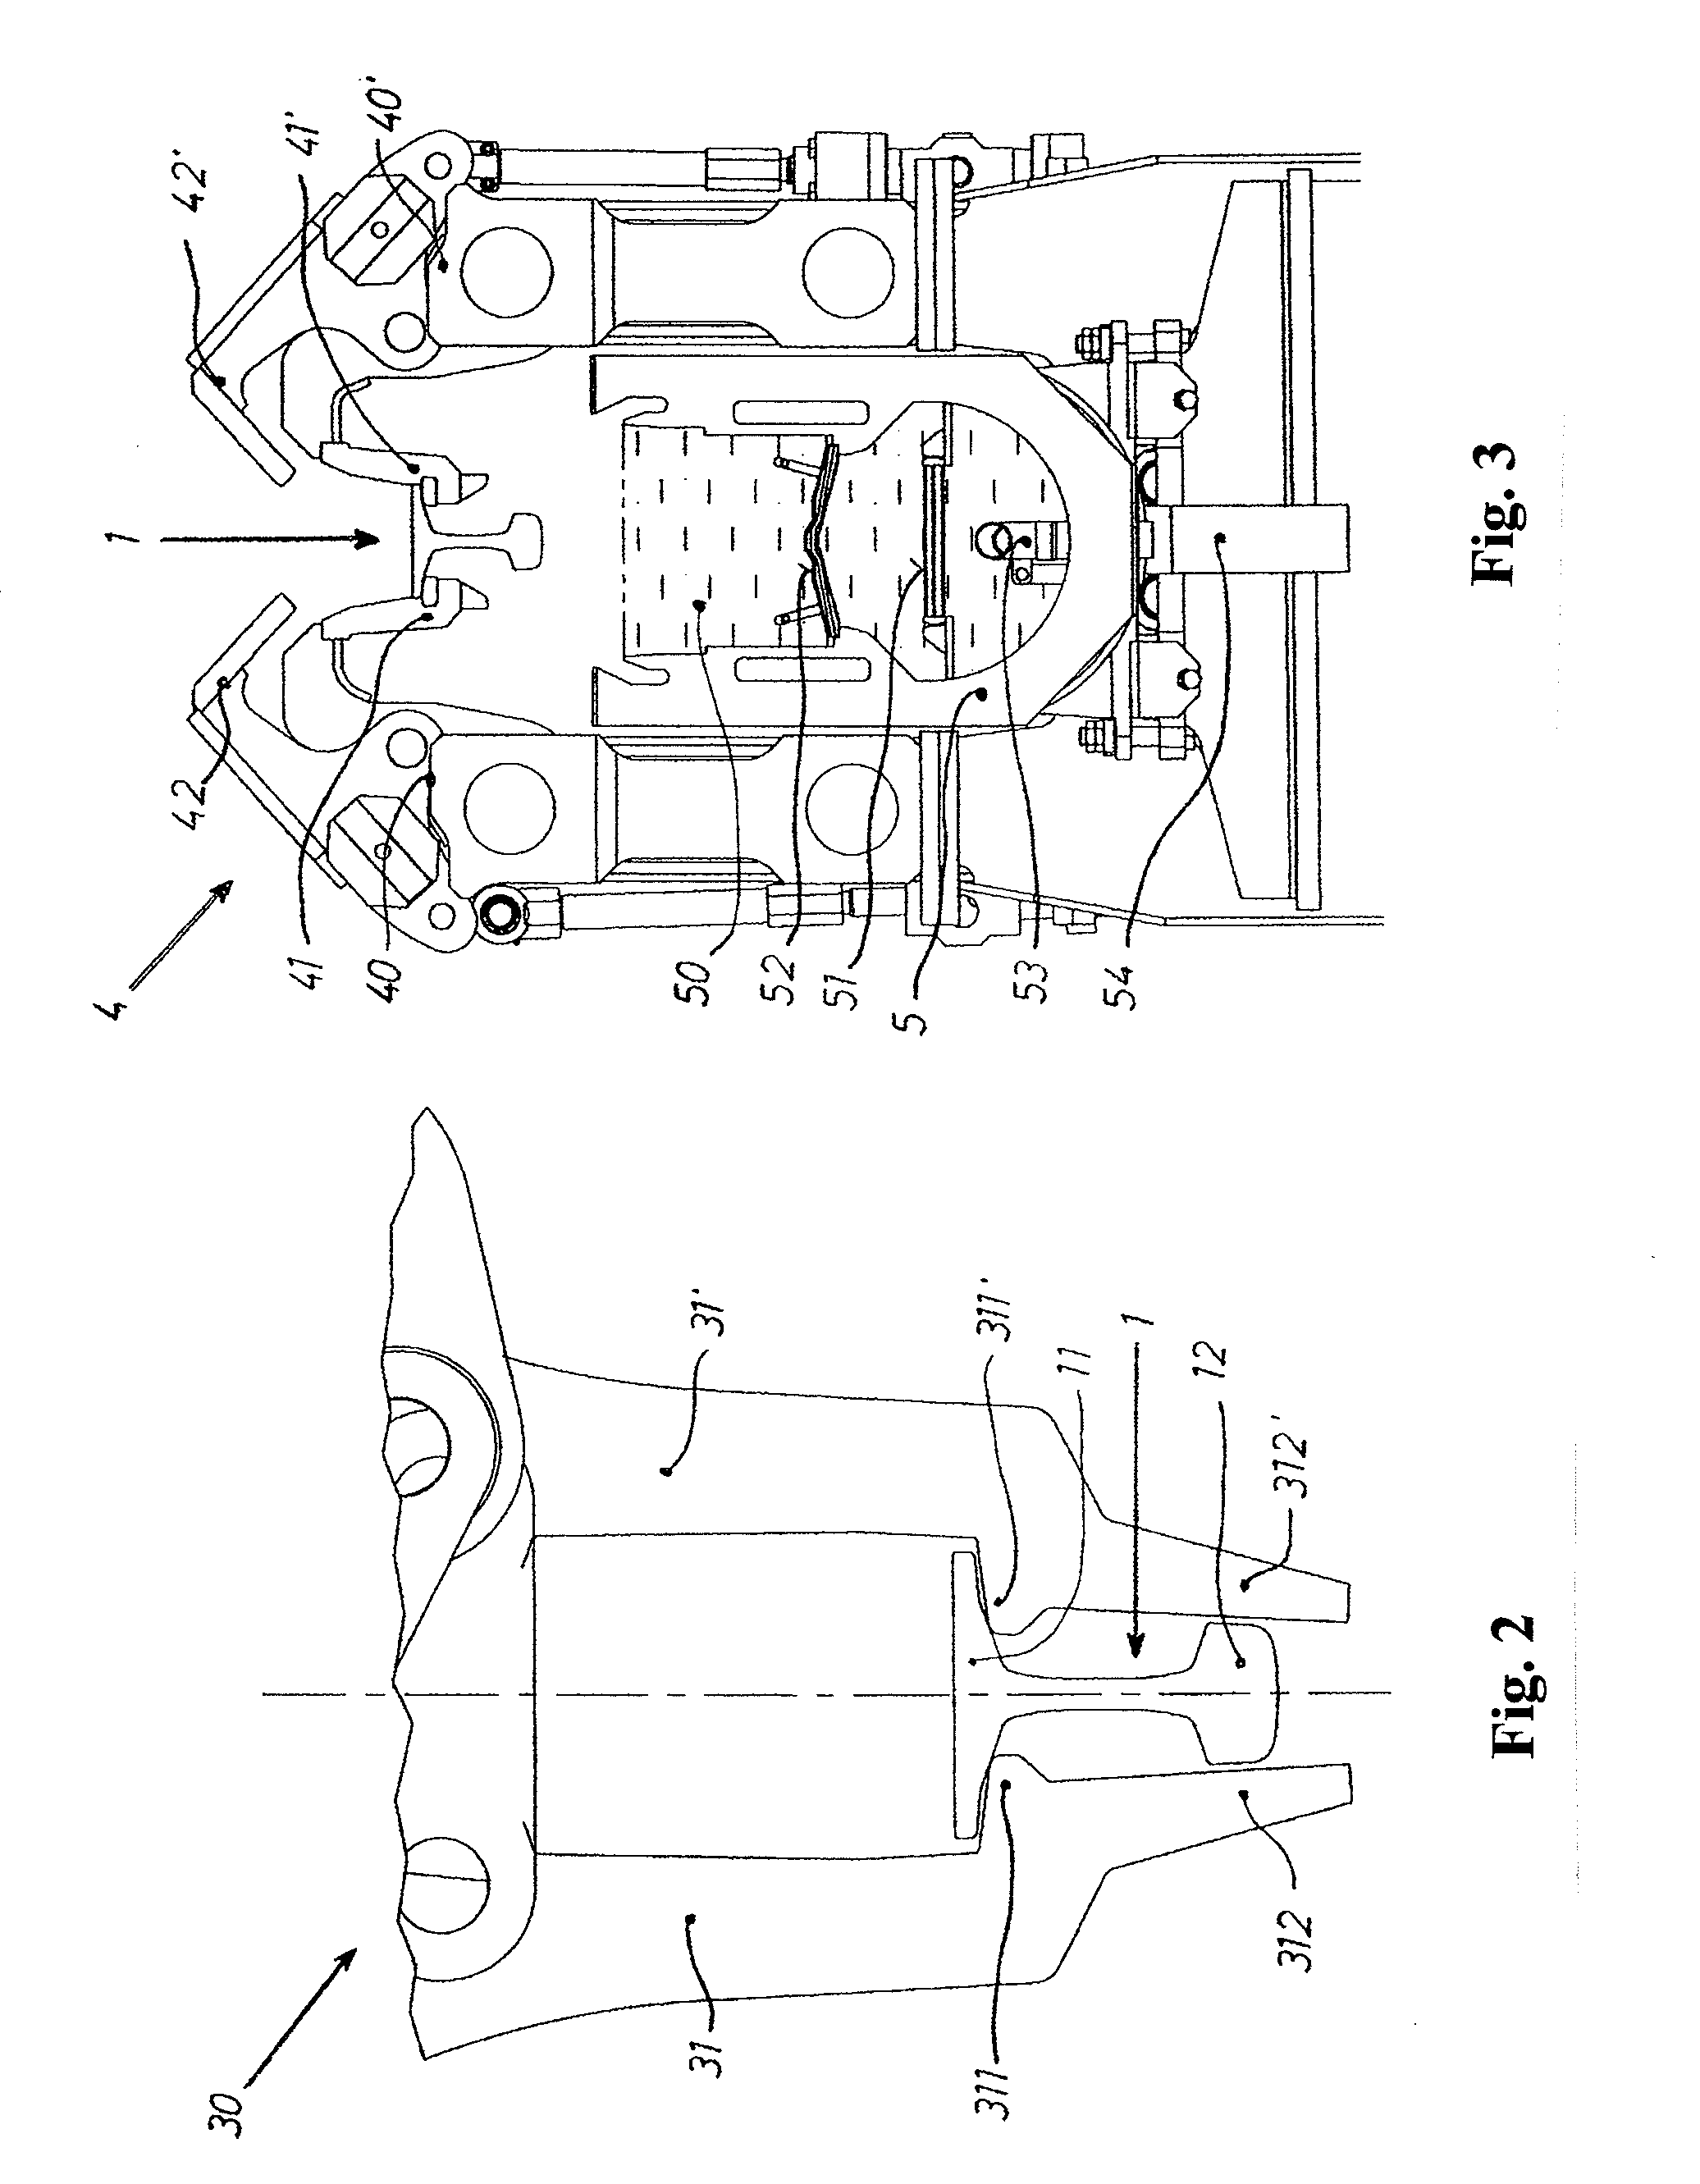 System and method for hardening rails